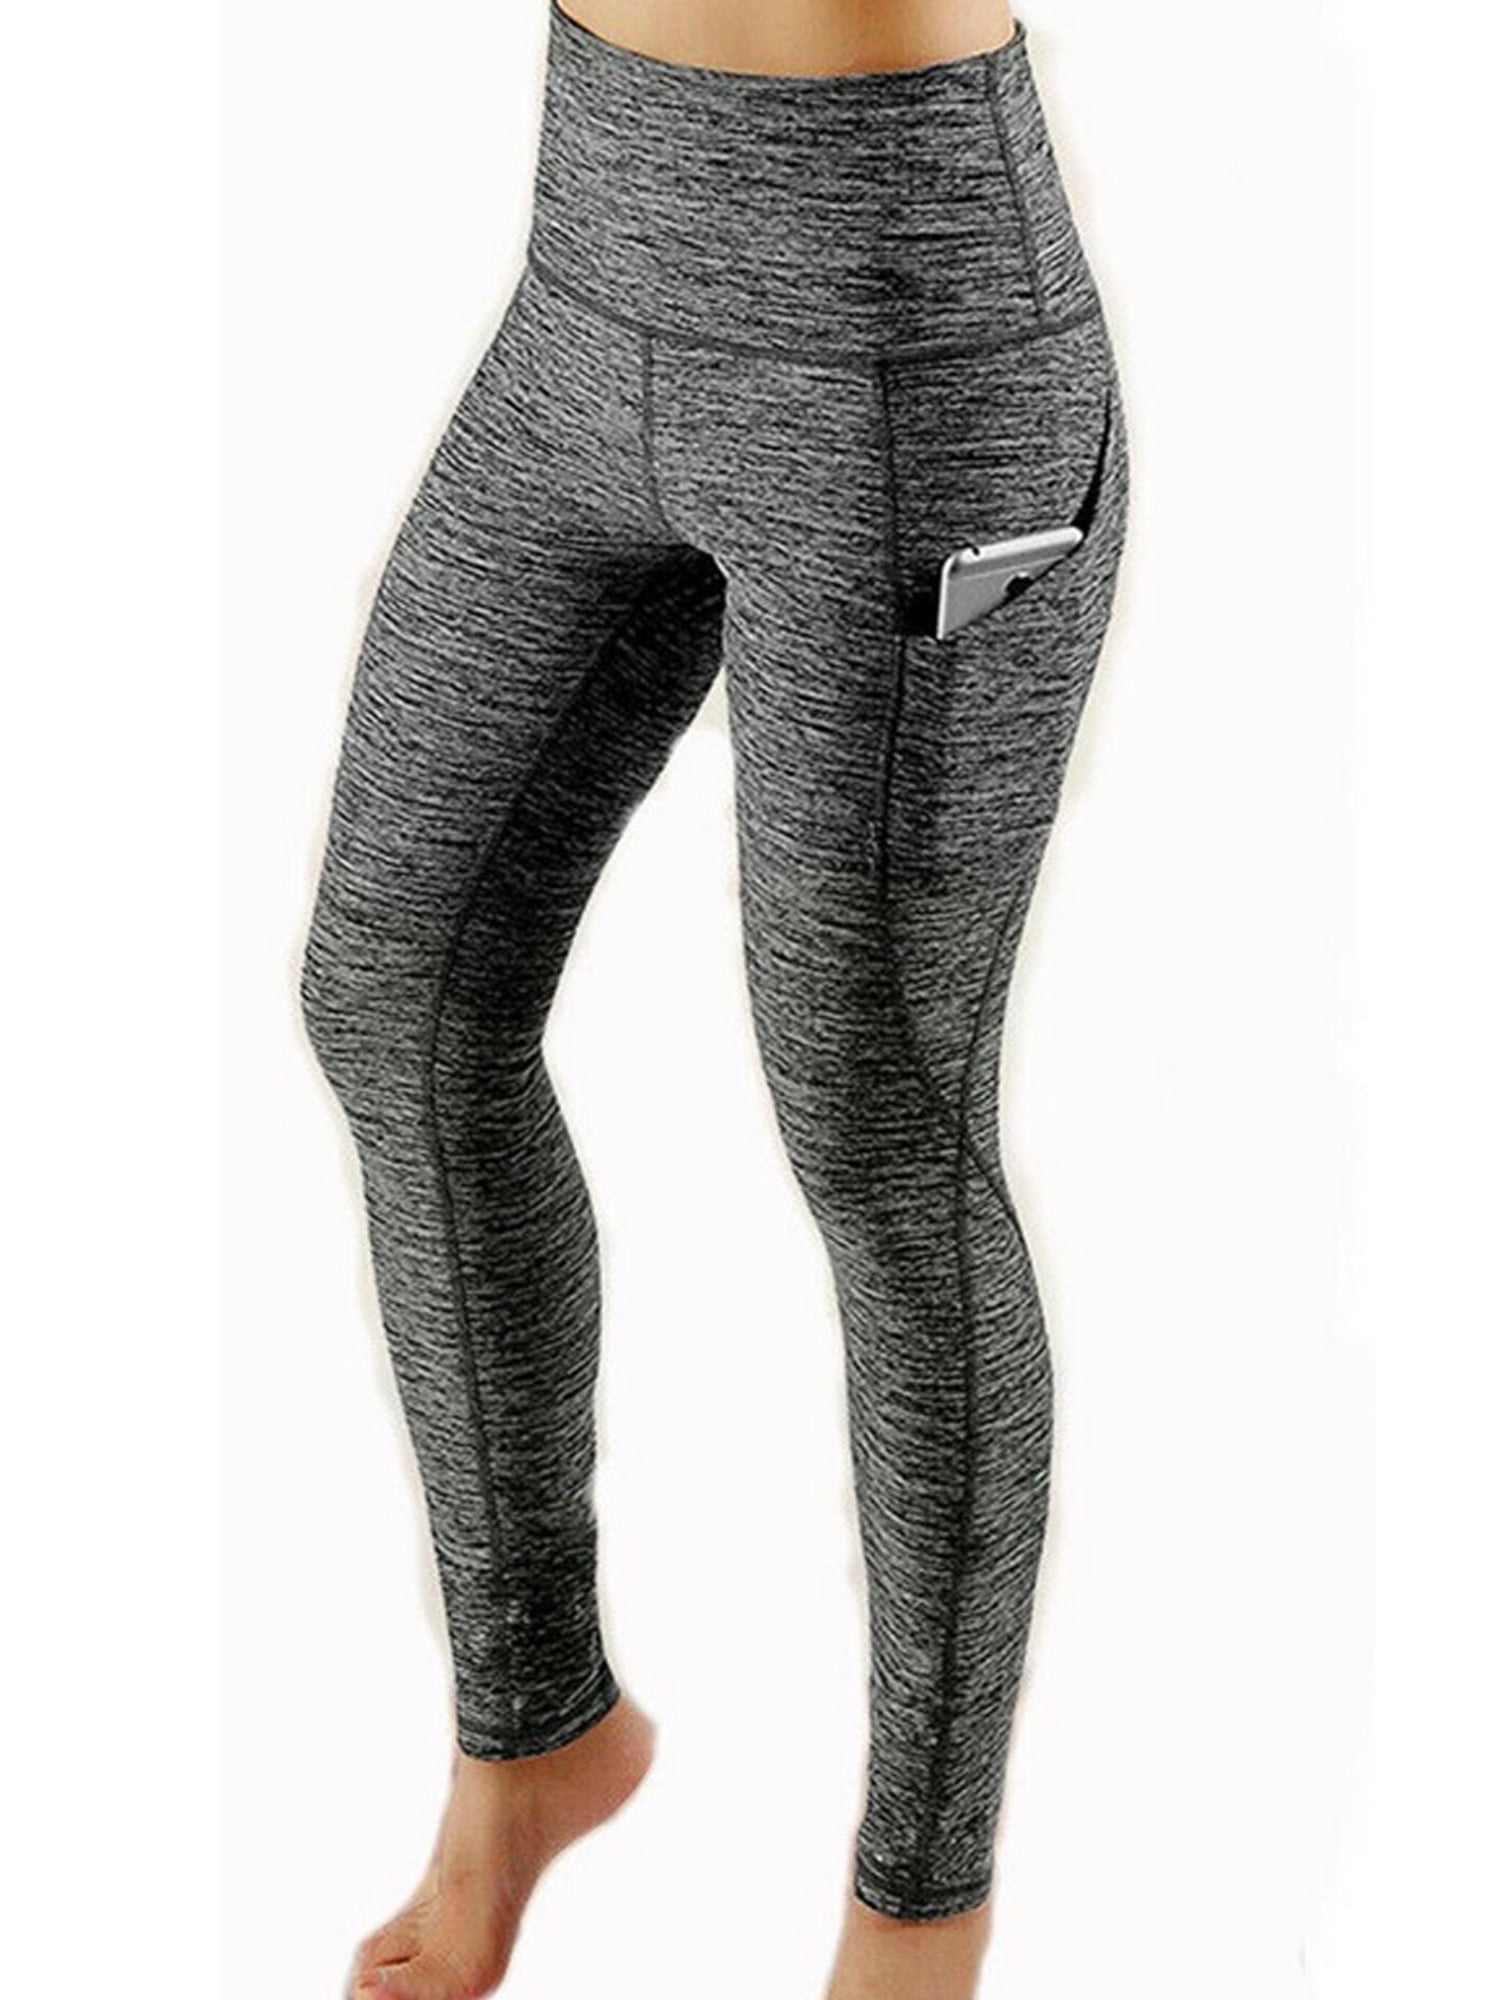 Frontwalk Workout Leggings for Women High Waisted Yoga Pants